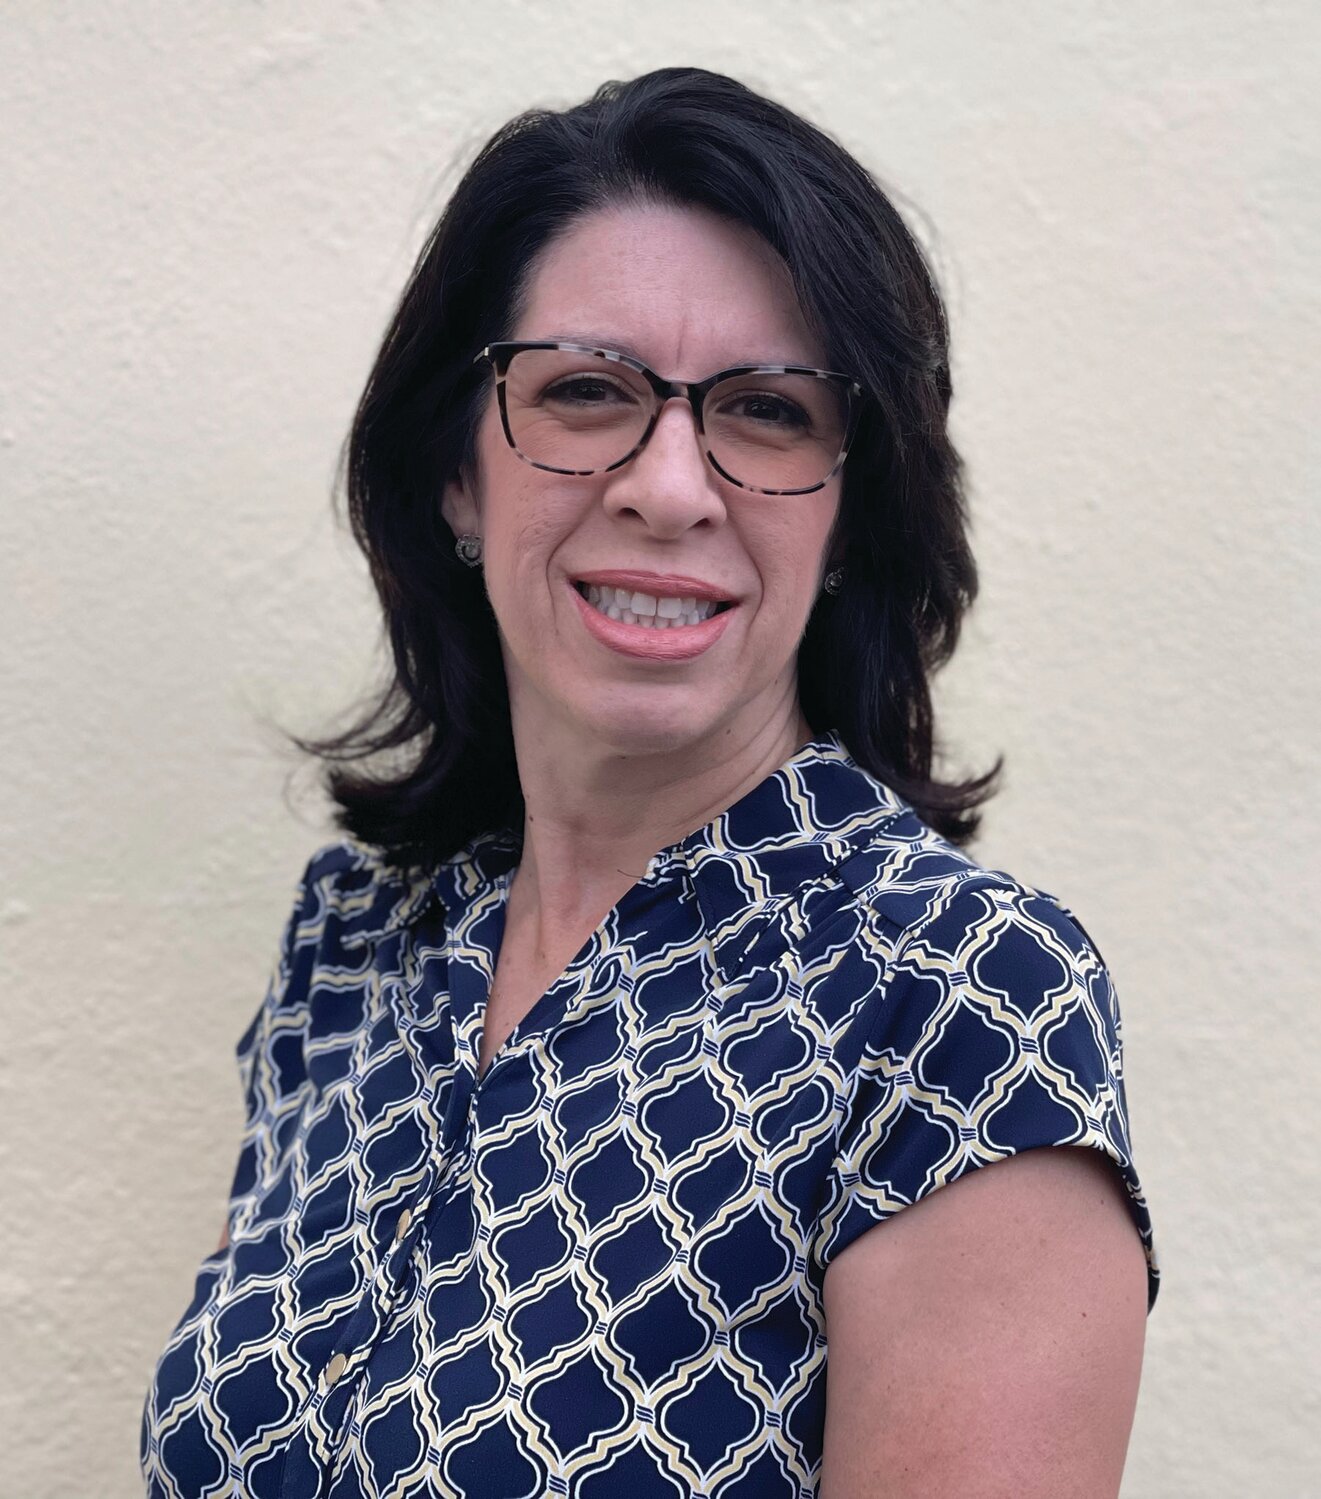 Cathy Rodriguez has been appointed to the Hendry Regional Hospital Authority Board.